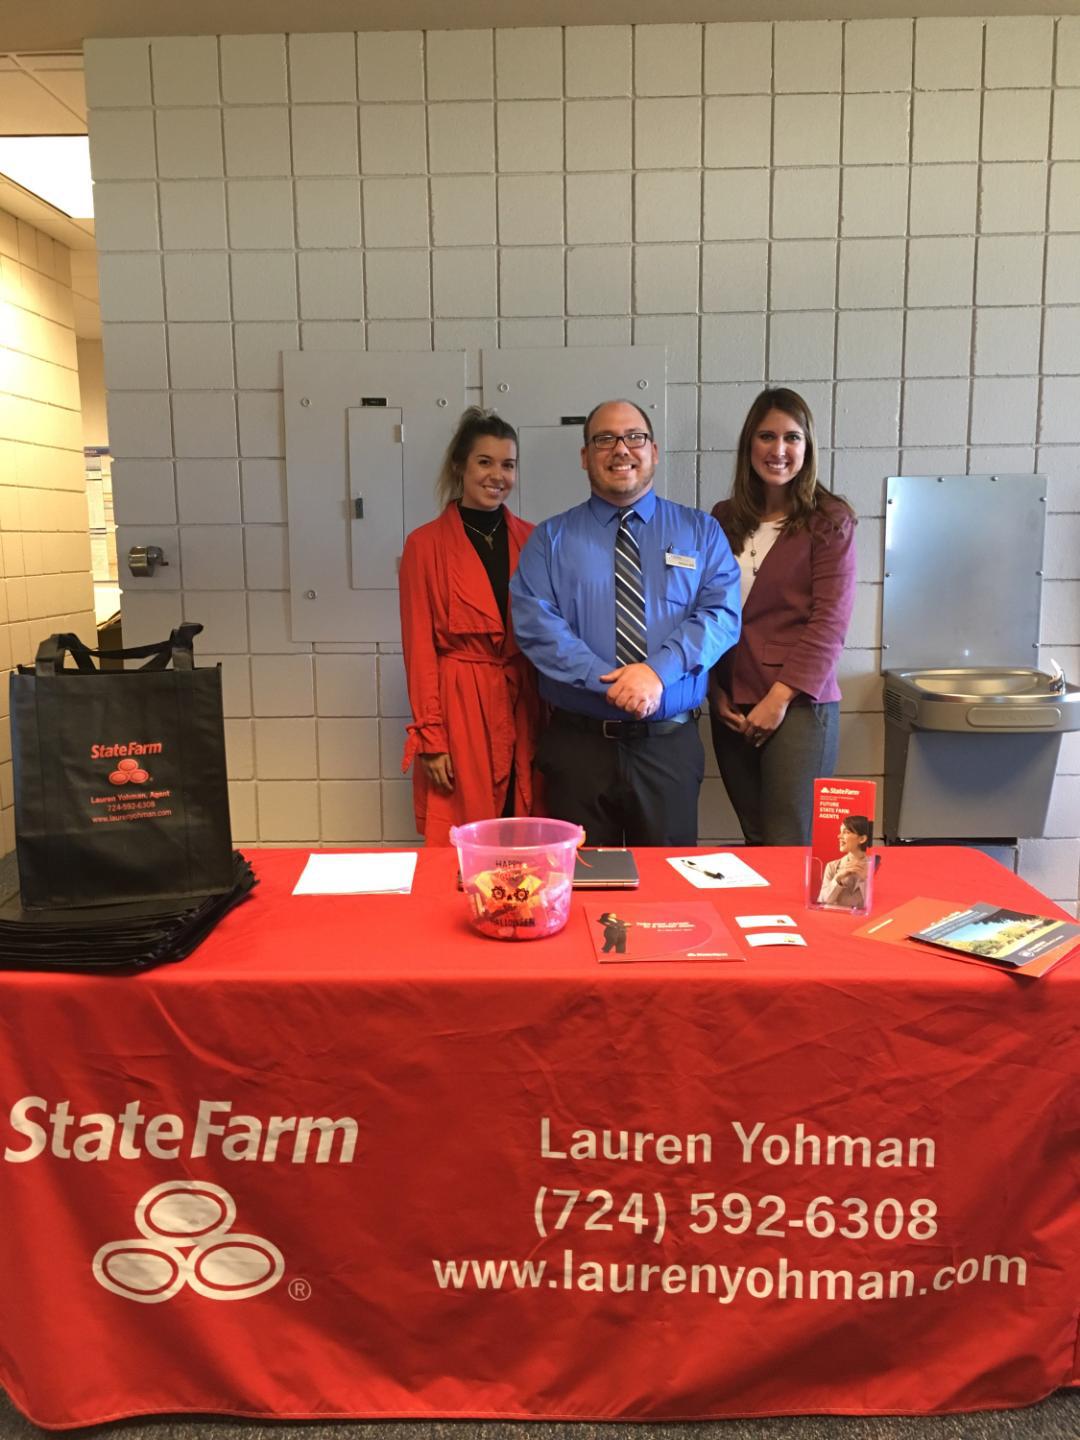 Thank you Penn State Fayette for allowing us to participate in your annual career fair. Lauren Yohman - State Farm Insurance Agent Uniontown (724)592-6308